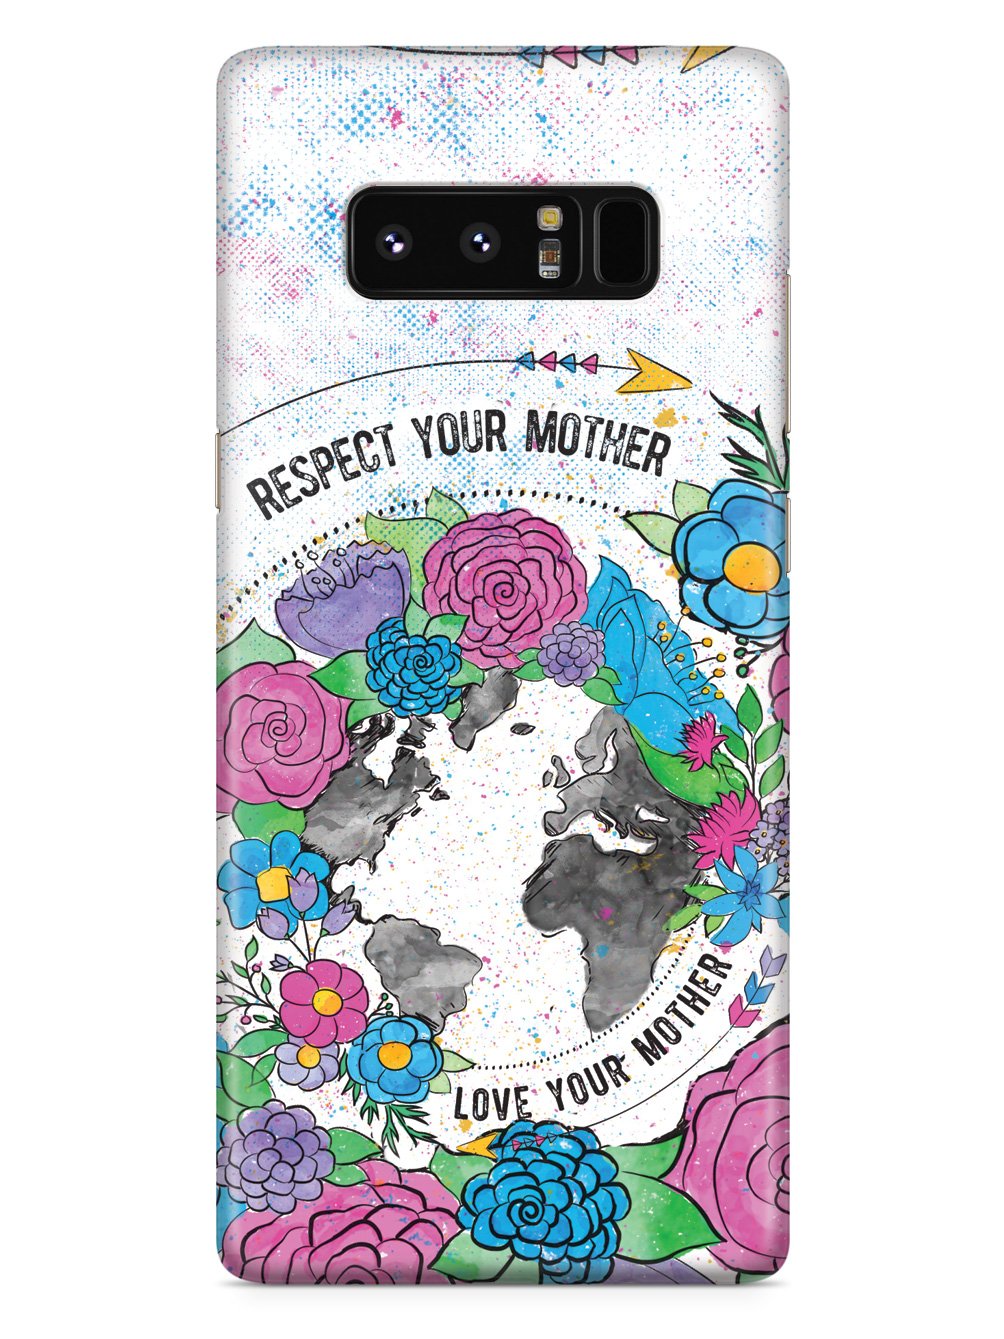 Respect & Love Your Mother - Earth Supporter - White Case